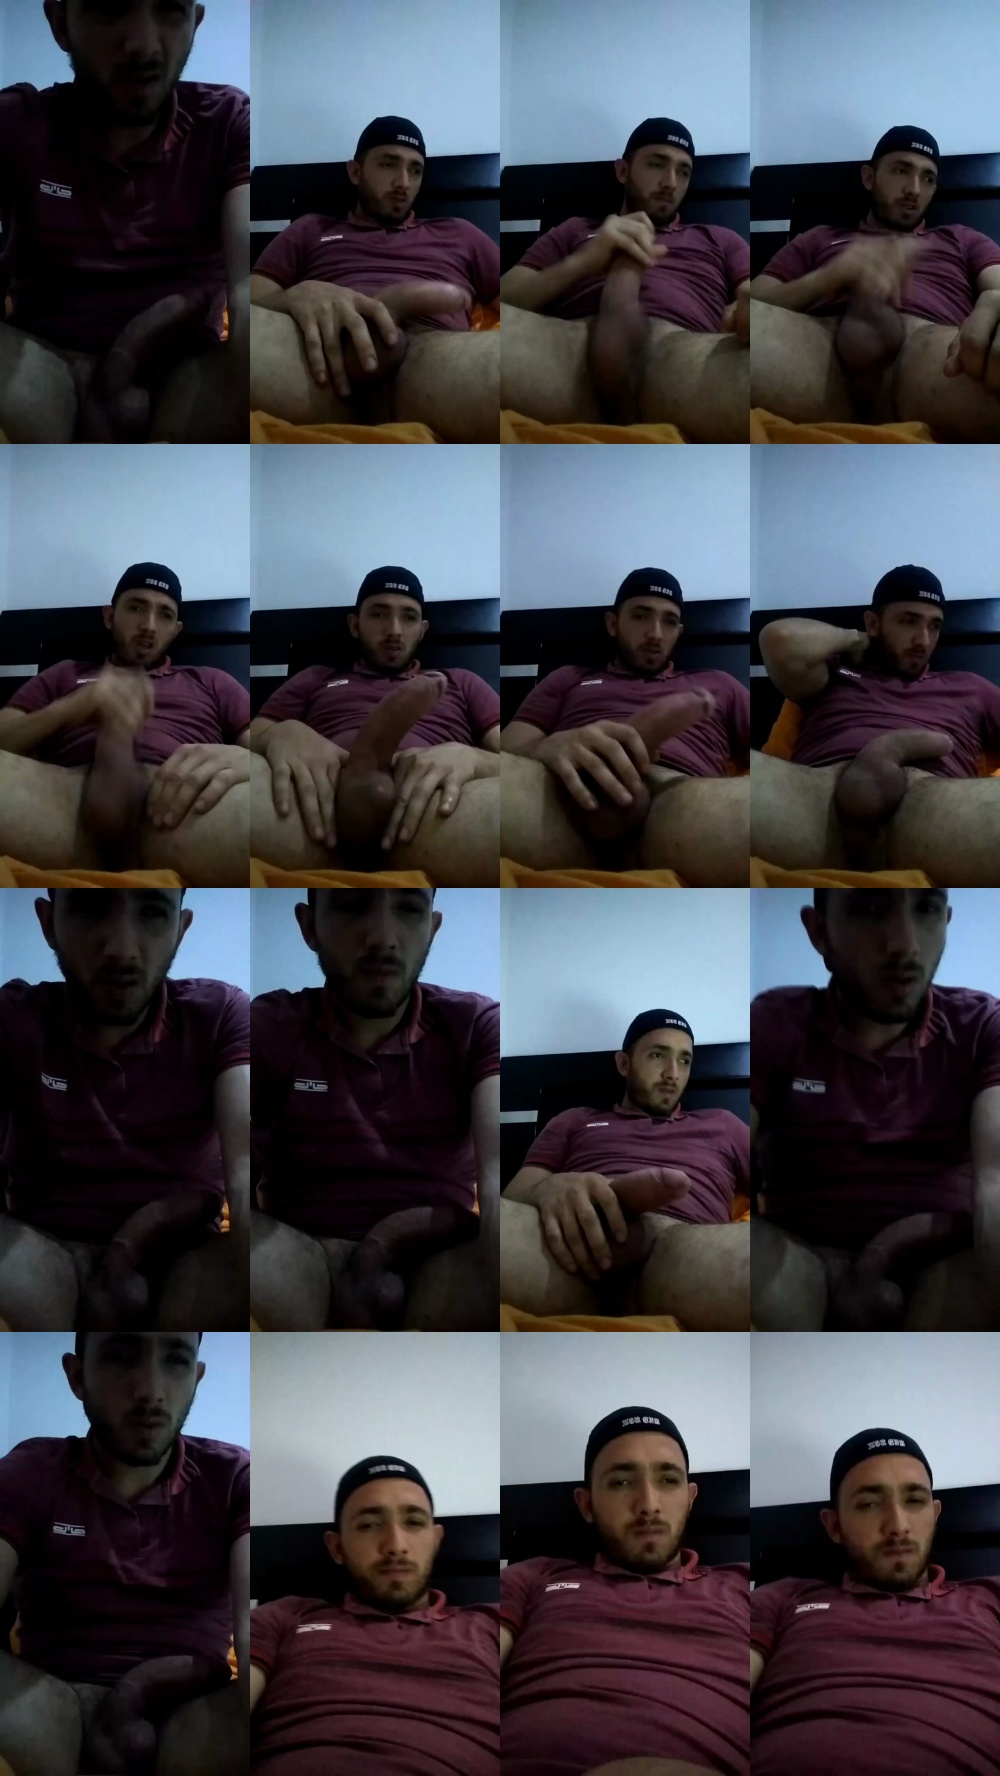 xsexkillerox 23-05-2019  Recorded Video Download